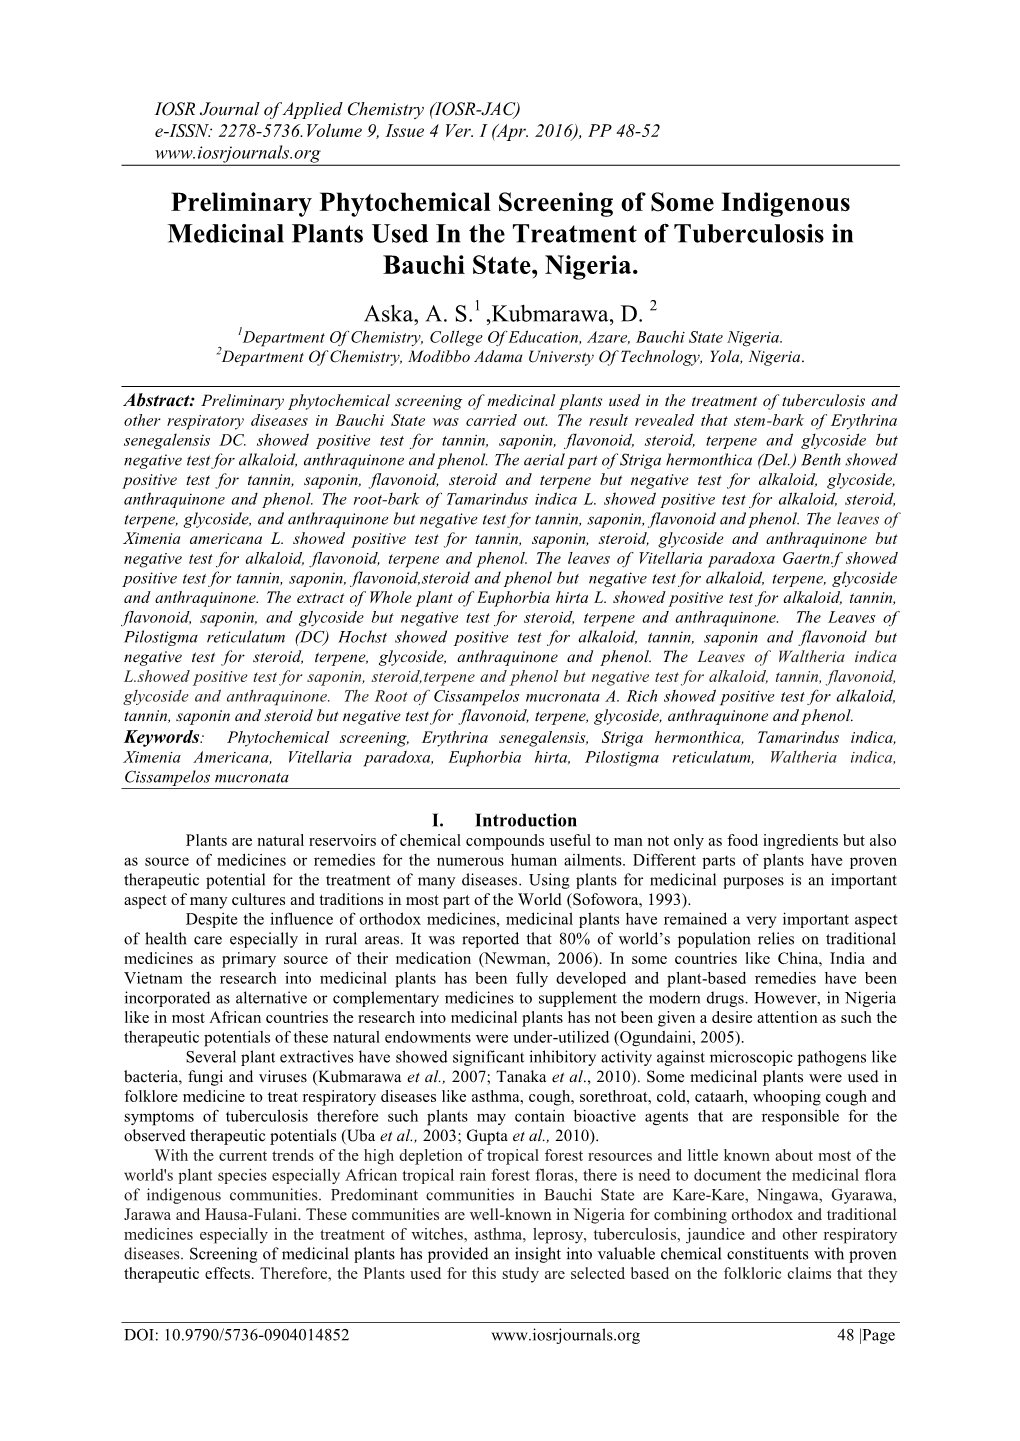 Preliminary Phytochemical Screening of Some Indigenous Medicinal Plants Used in the Treatment of Tuberculosis in Bauchi State, Nigeria